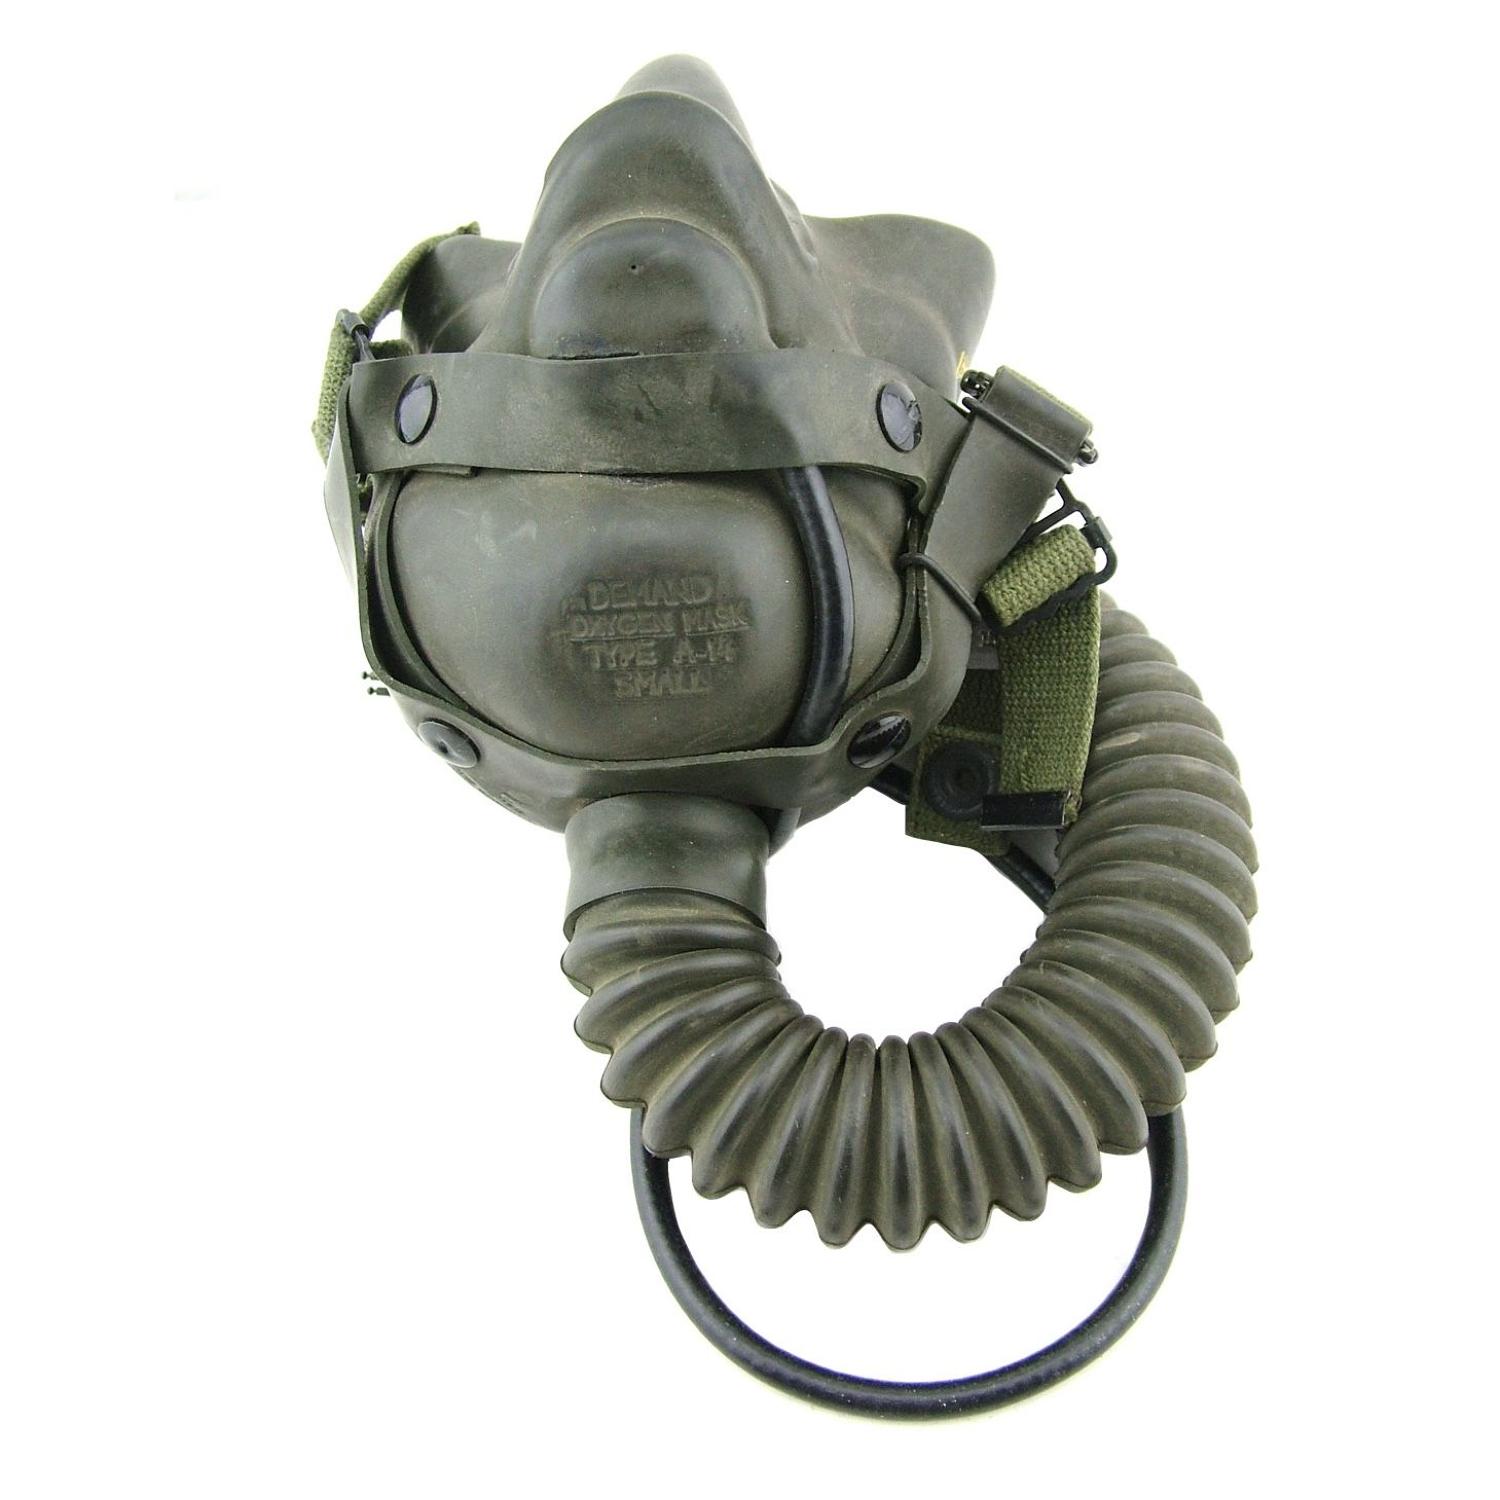 USAAF A-14 oxygen mask, 8th AAF modification, wired